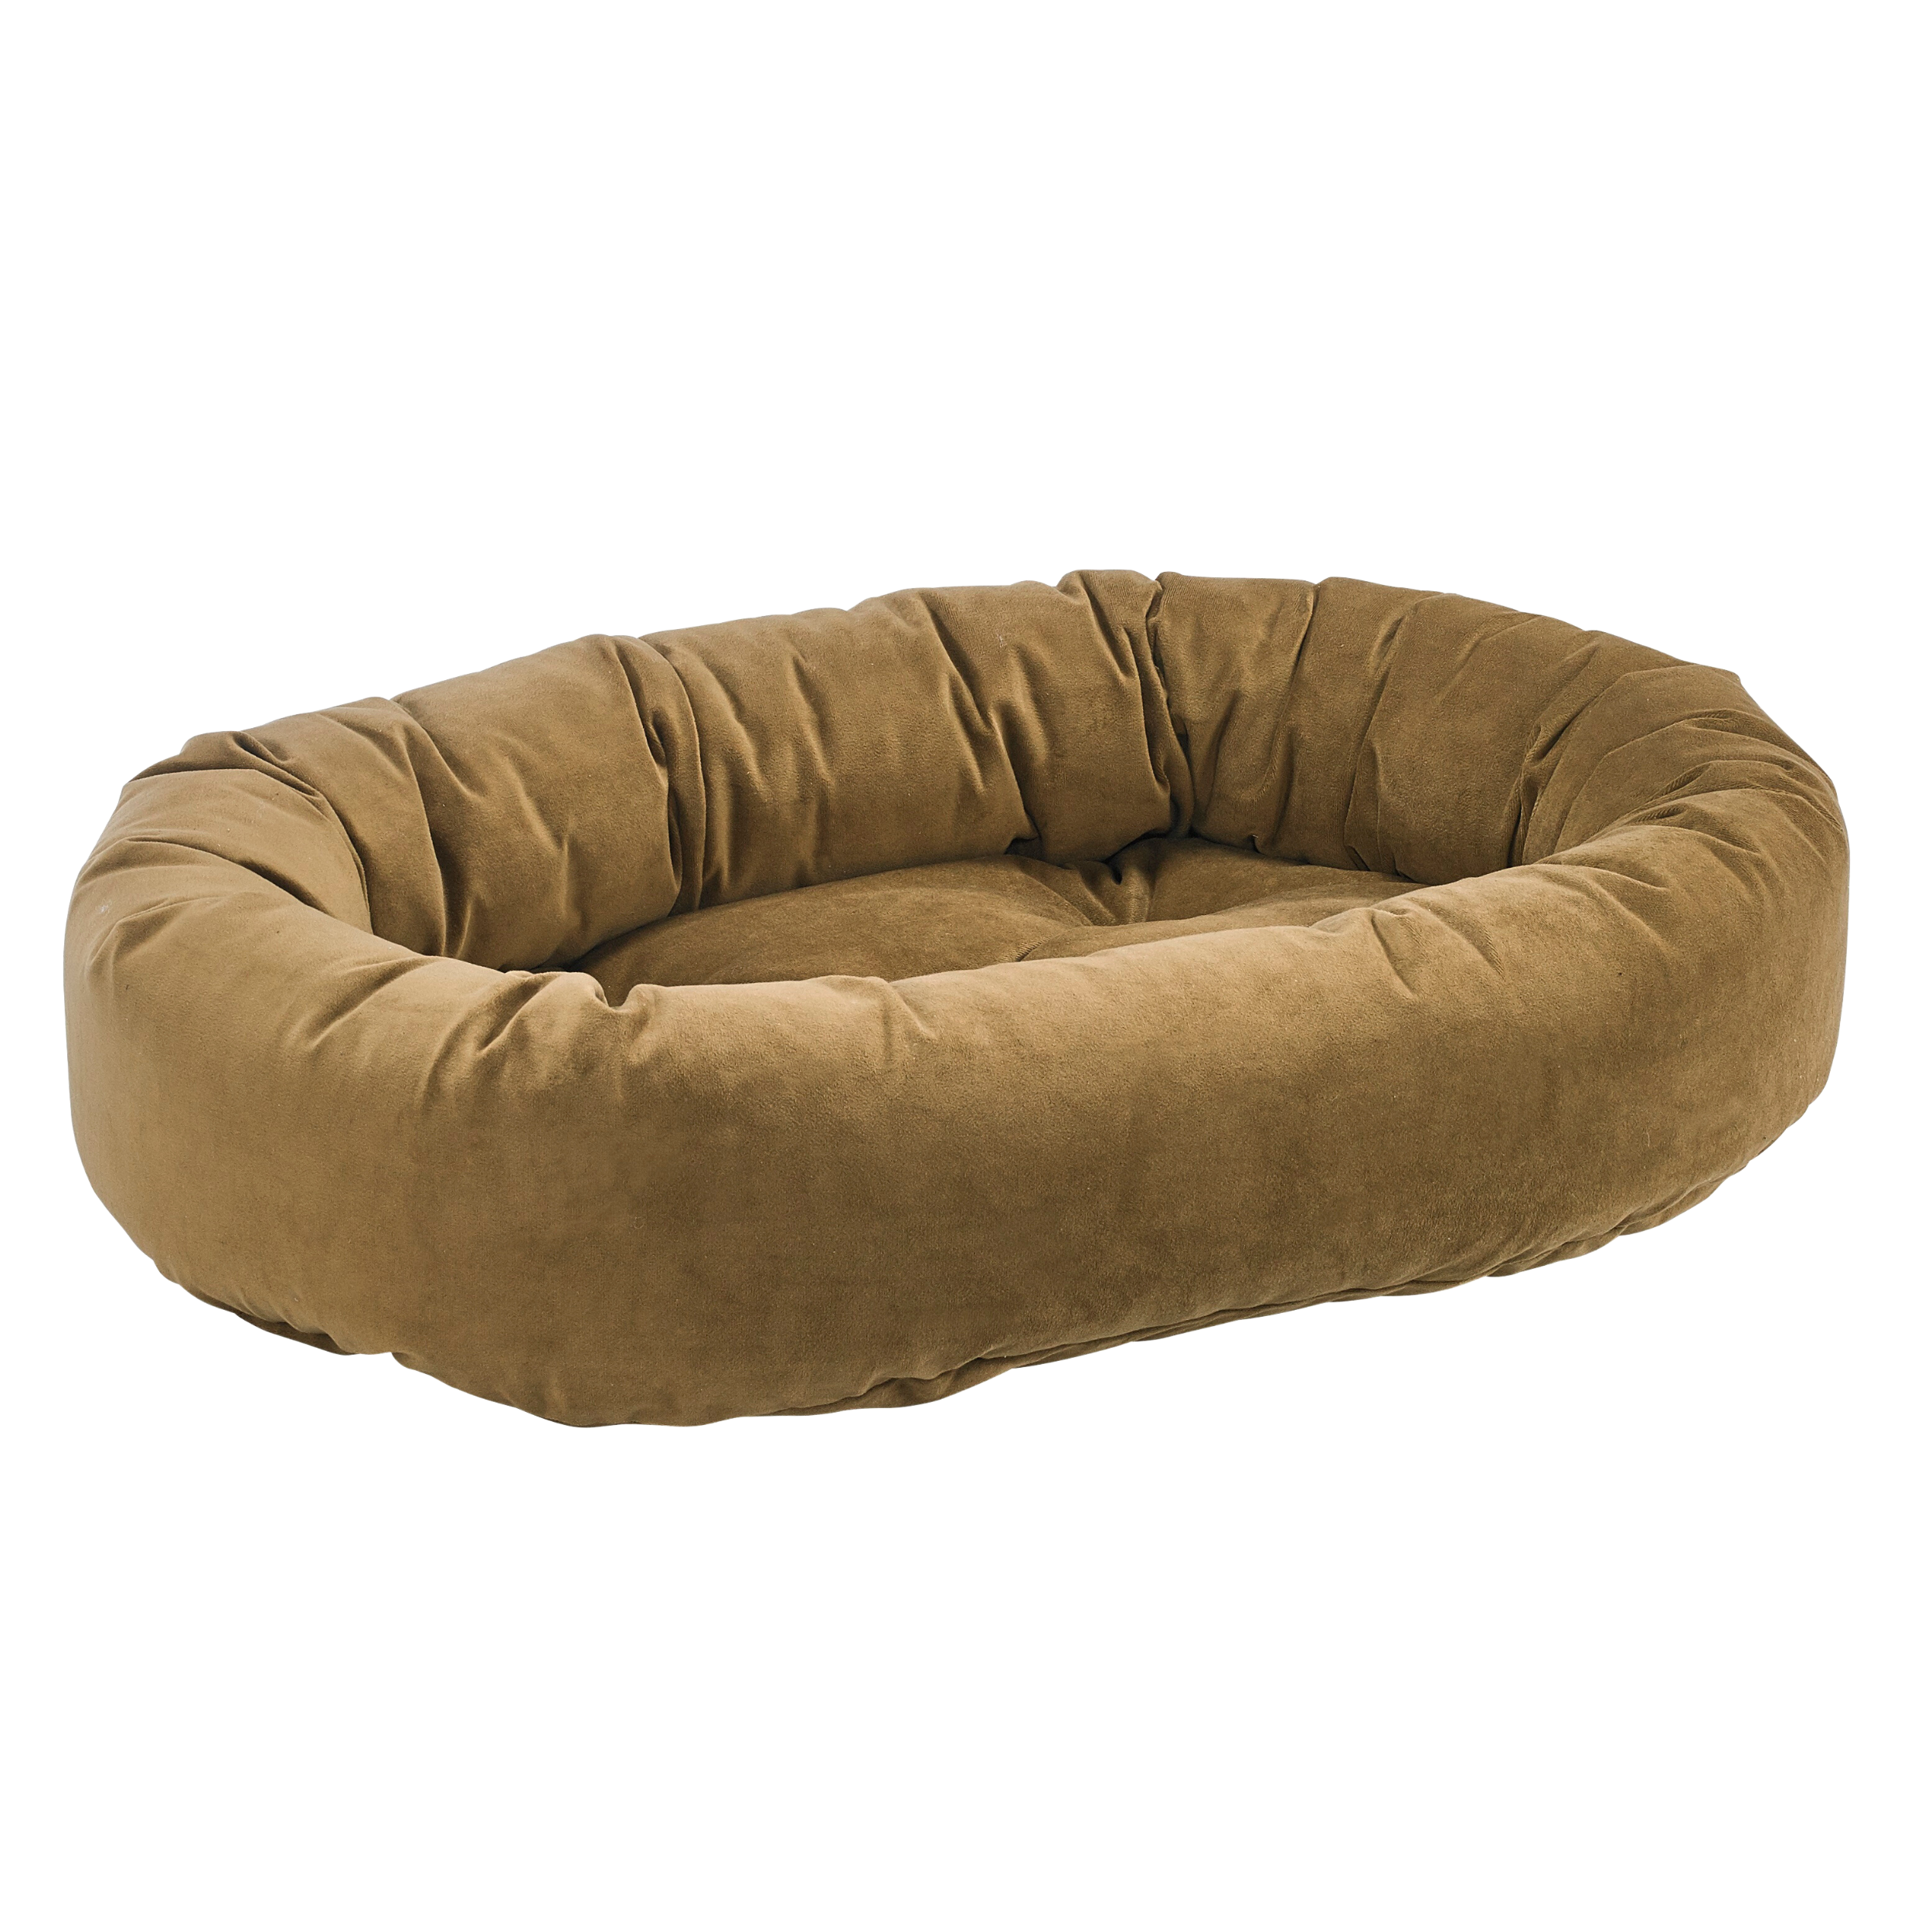 TOFFEE-DONUT-DOG-BED